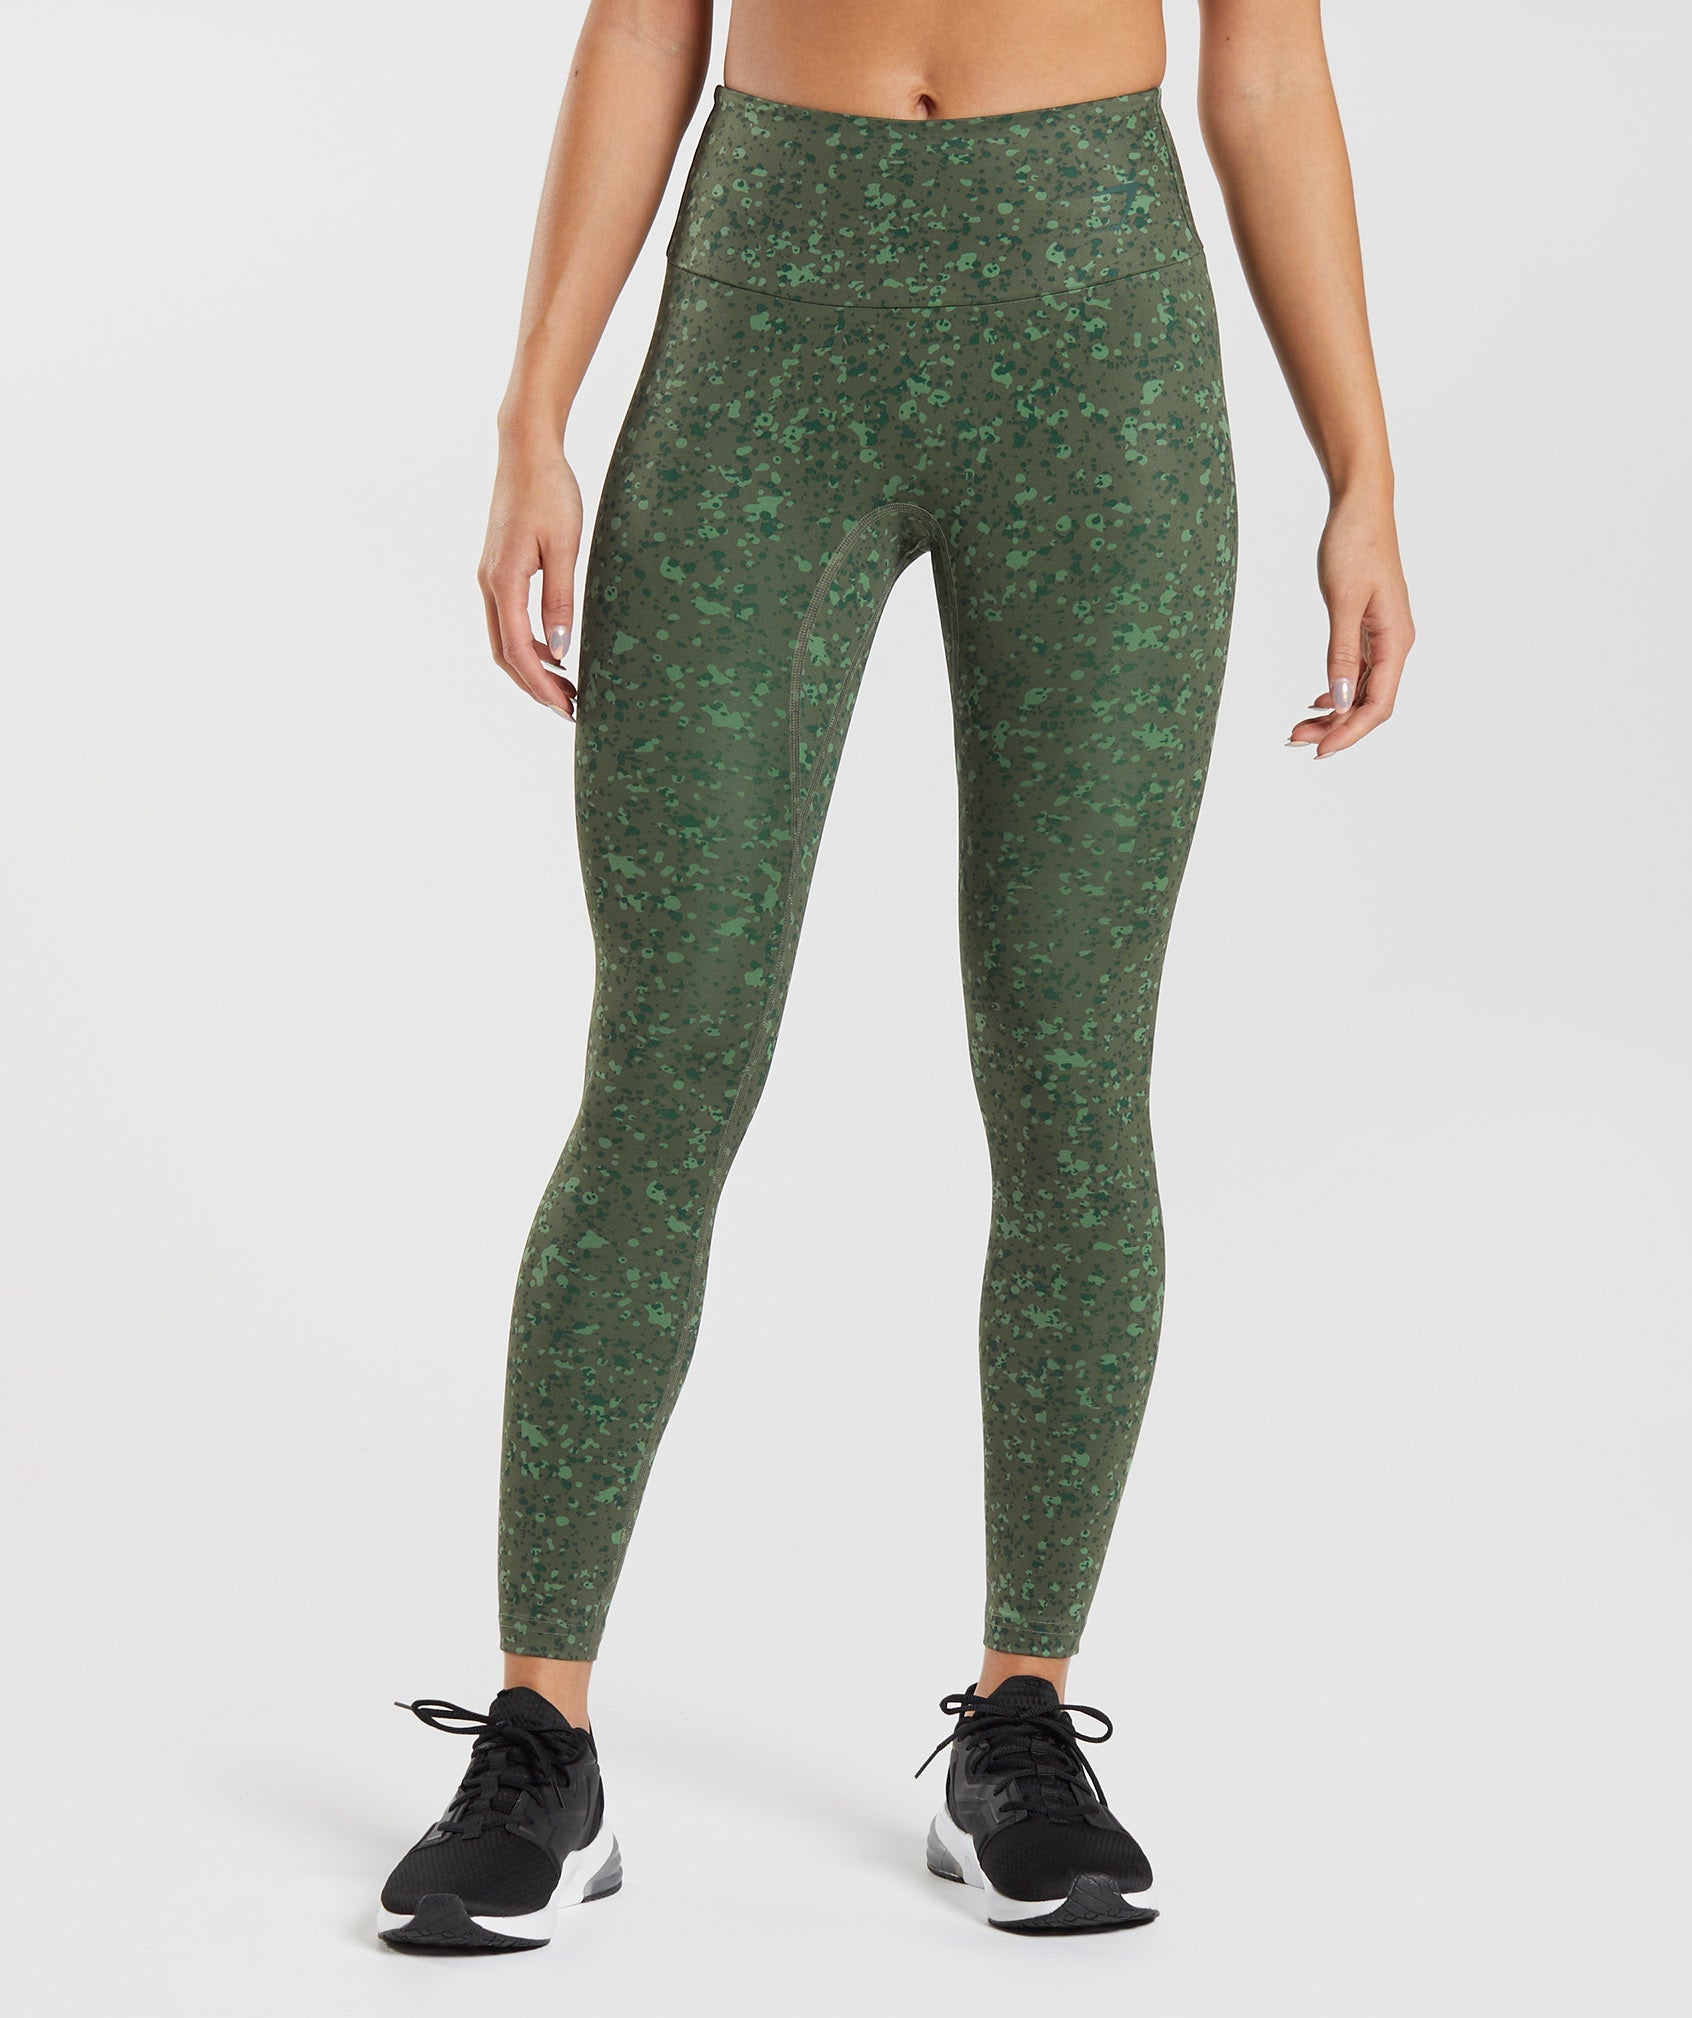 Lululemon Forest Green Ruched Mid Rise Knee Length Cropped Athletic Leggings  4 | eBay